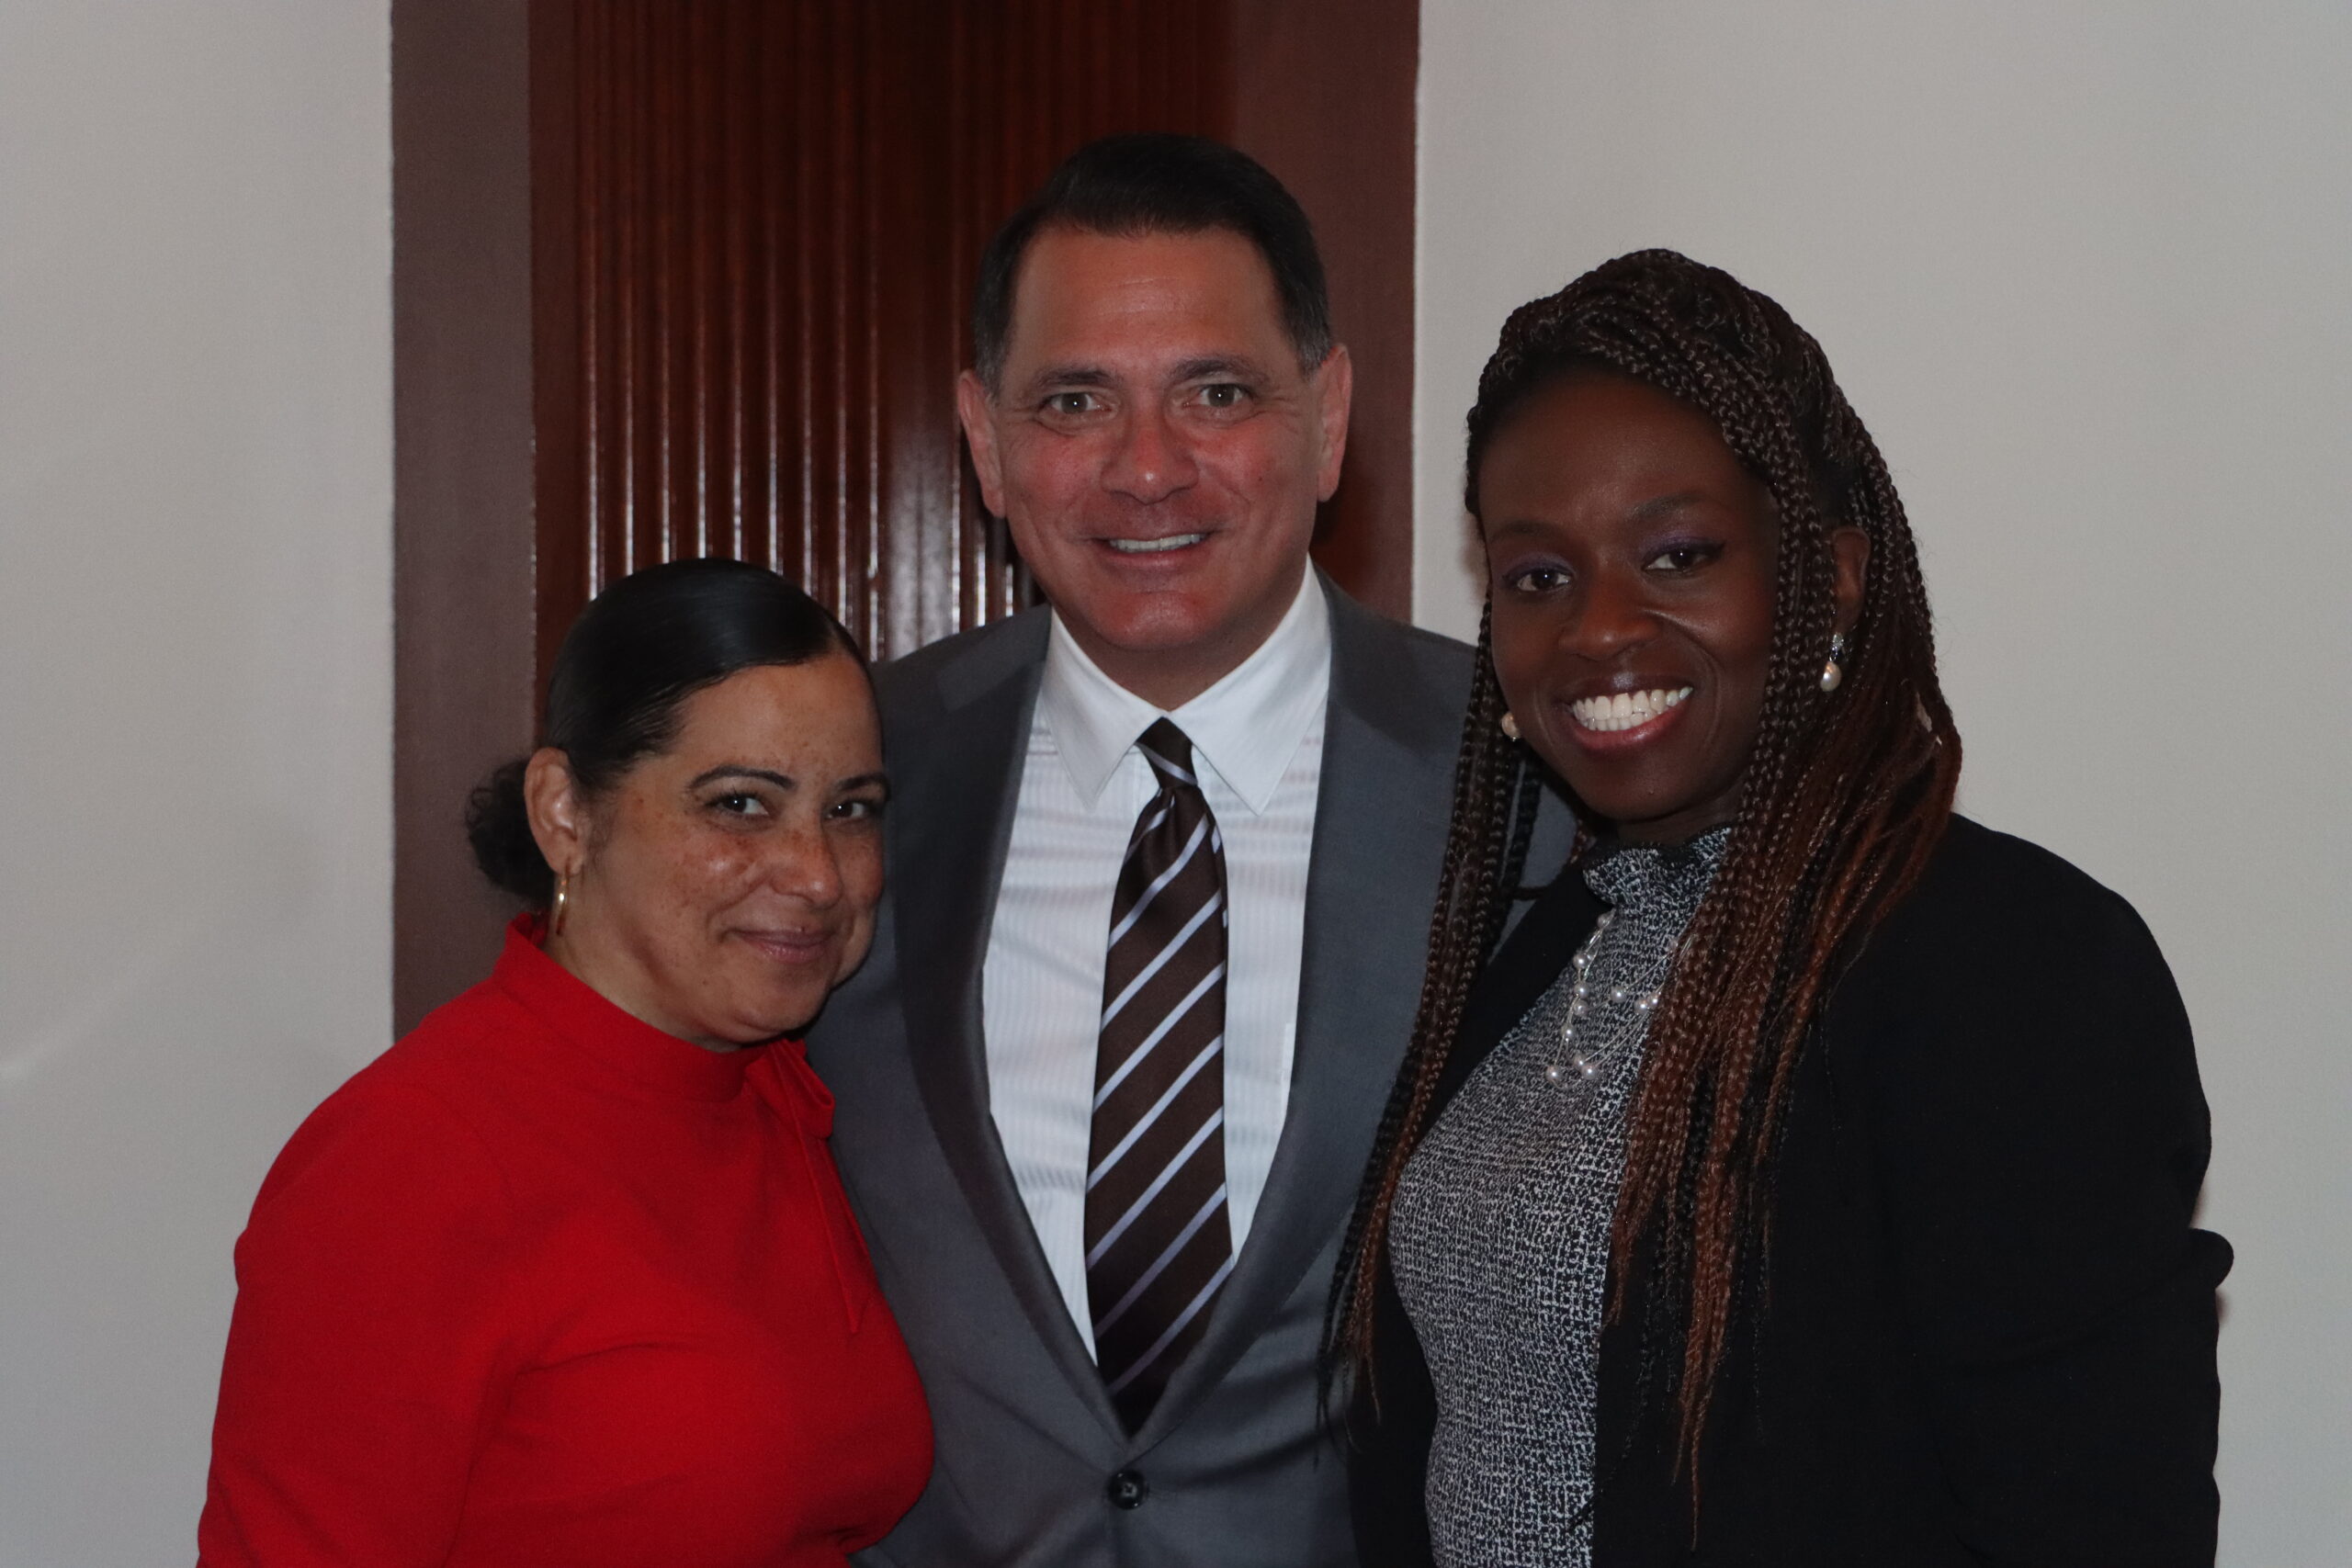 From left: Hon. Joanne Quinones, Christopher Caputo, and Betsey Jean-Jacques, president of the Catholic Lawyers Guild of Kings County at Columbian Lawyers Association annual Italian Heritage event.